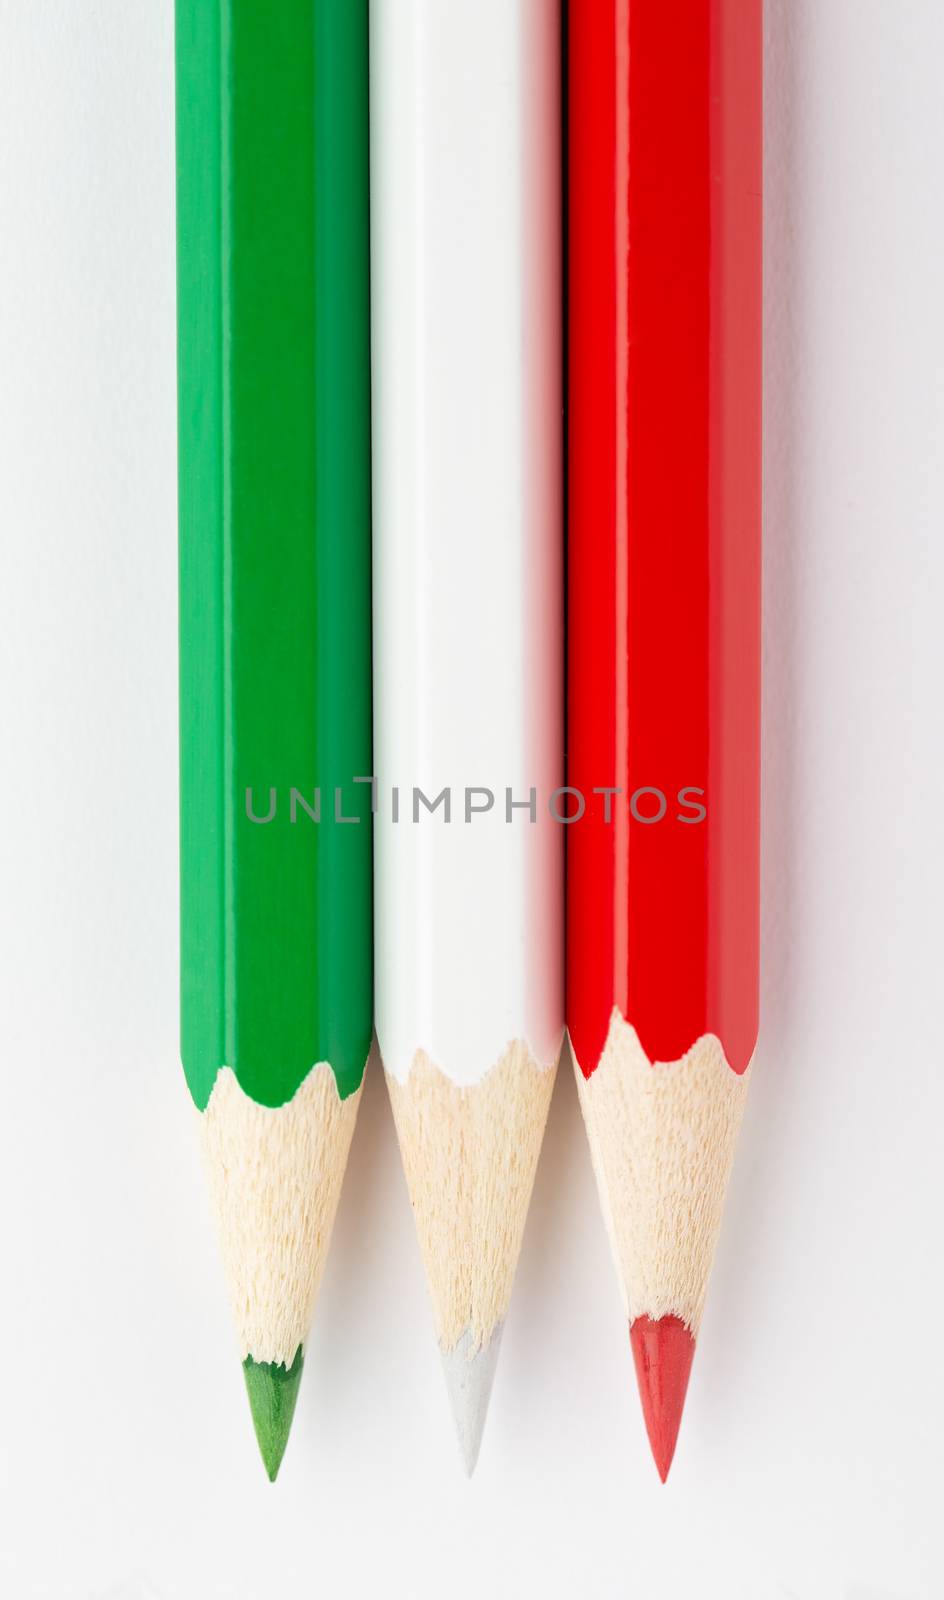 The State flags made of colorful wooden pencils Italy